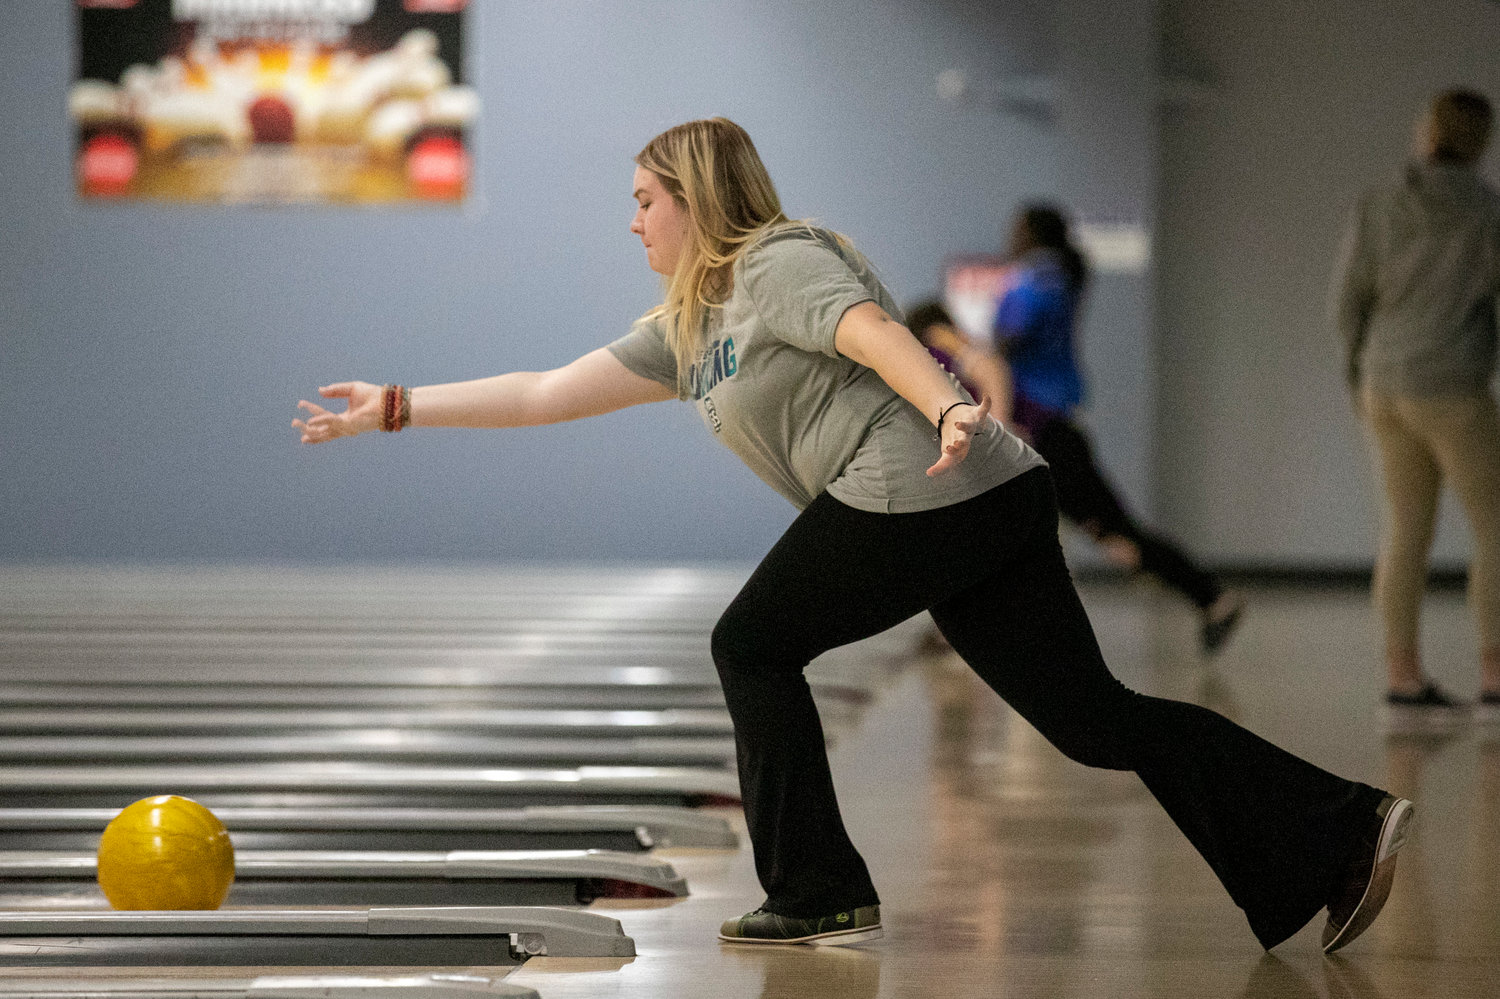 Morgyn Jones from Gulf Shores releases a shot during Jan. 19’s qualifying round of the South Regional bowling championships at Eastern Shore Lanes in Spanish Fort. Jones was among three Dolphin representatives named all-state honorable mentions on the first-ever all-state team as awarded by Alabama high school bowling coaches.